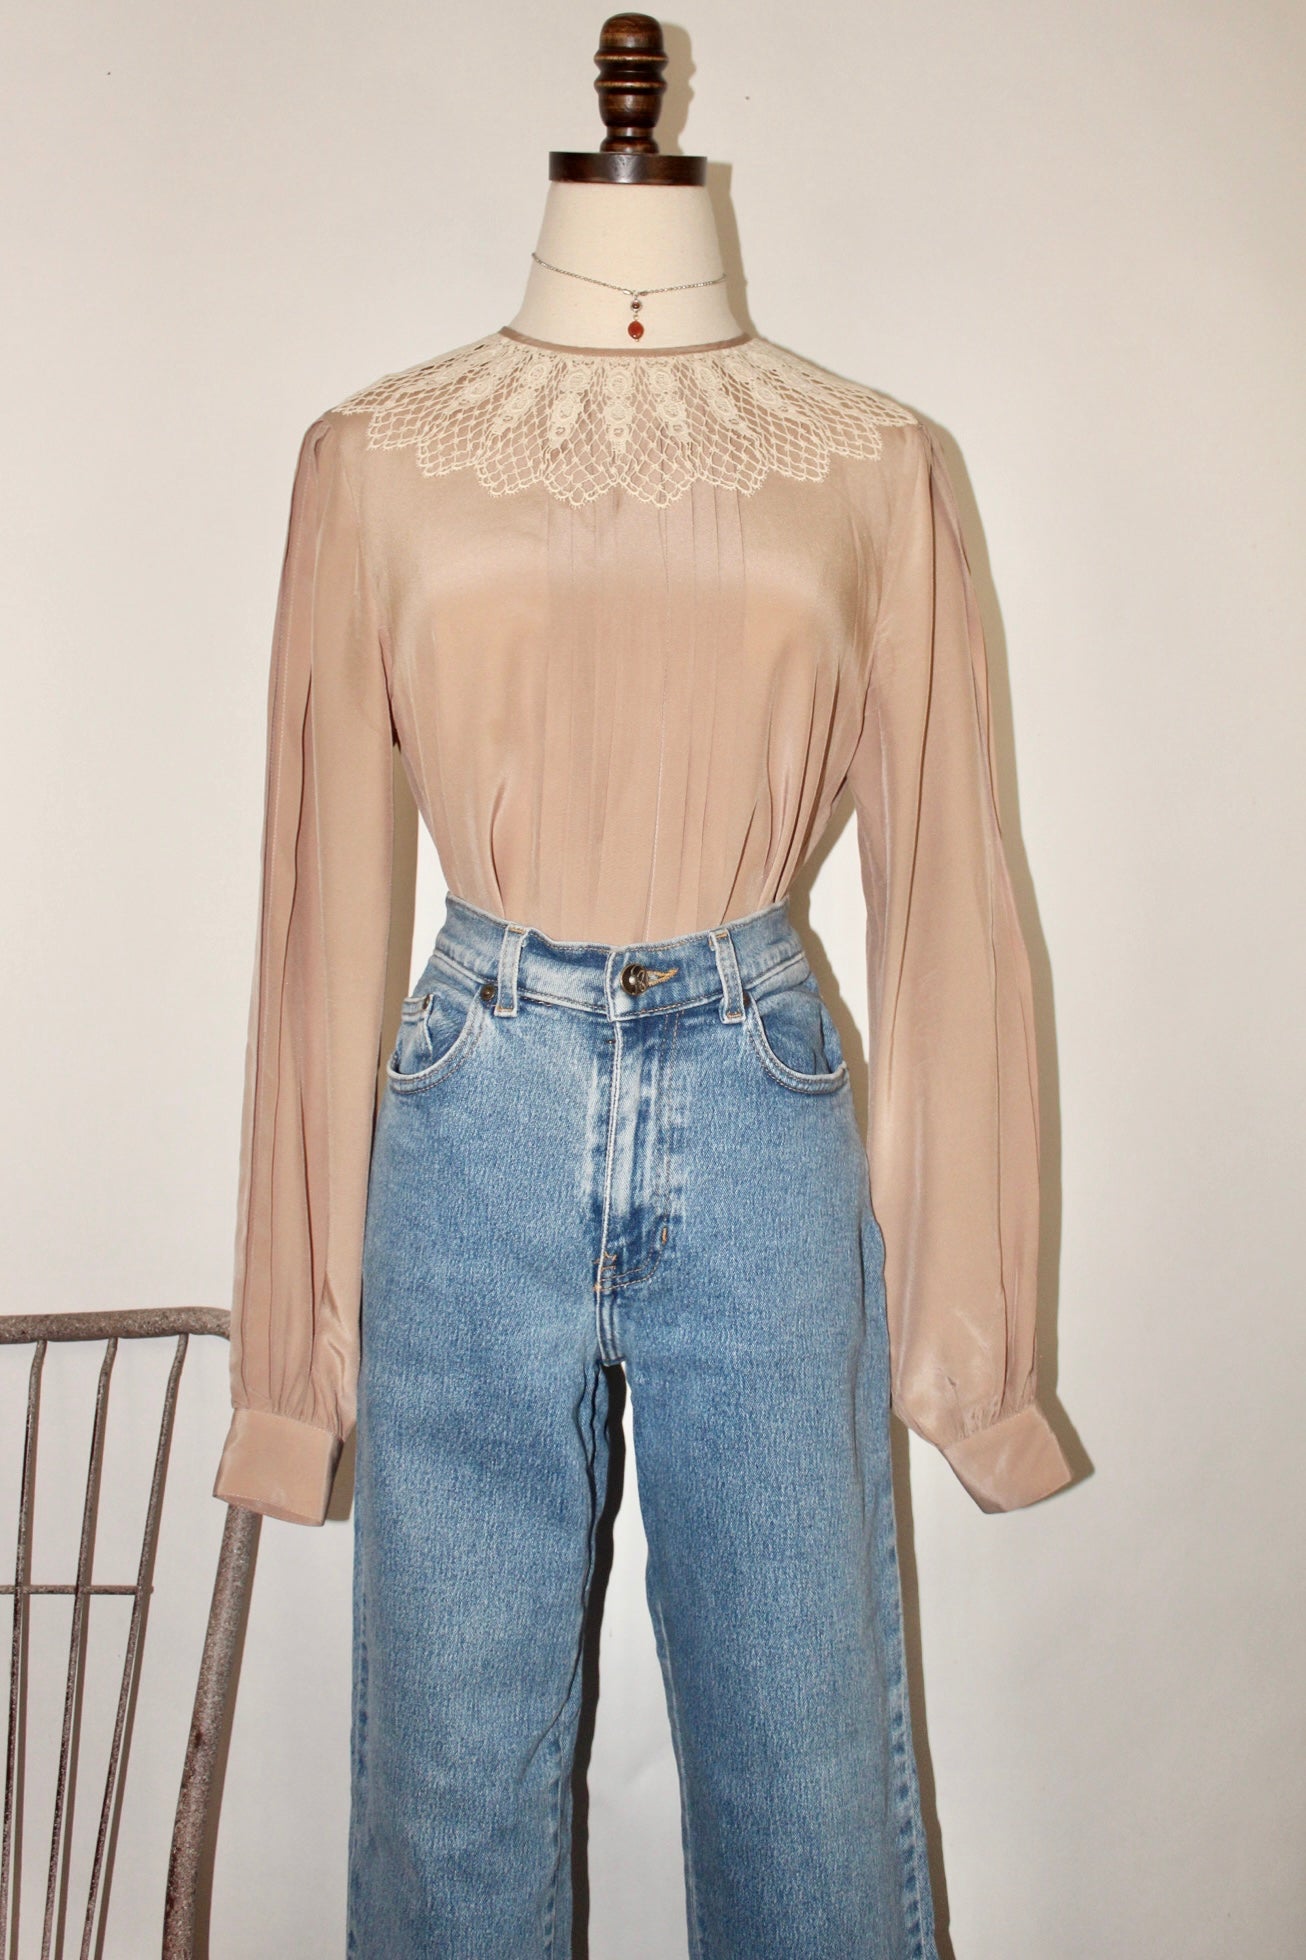 Vintage 80s Lace Overlay Blouse (S-M)